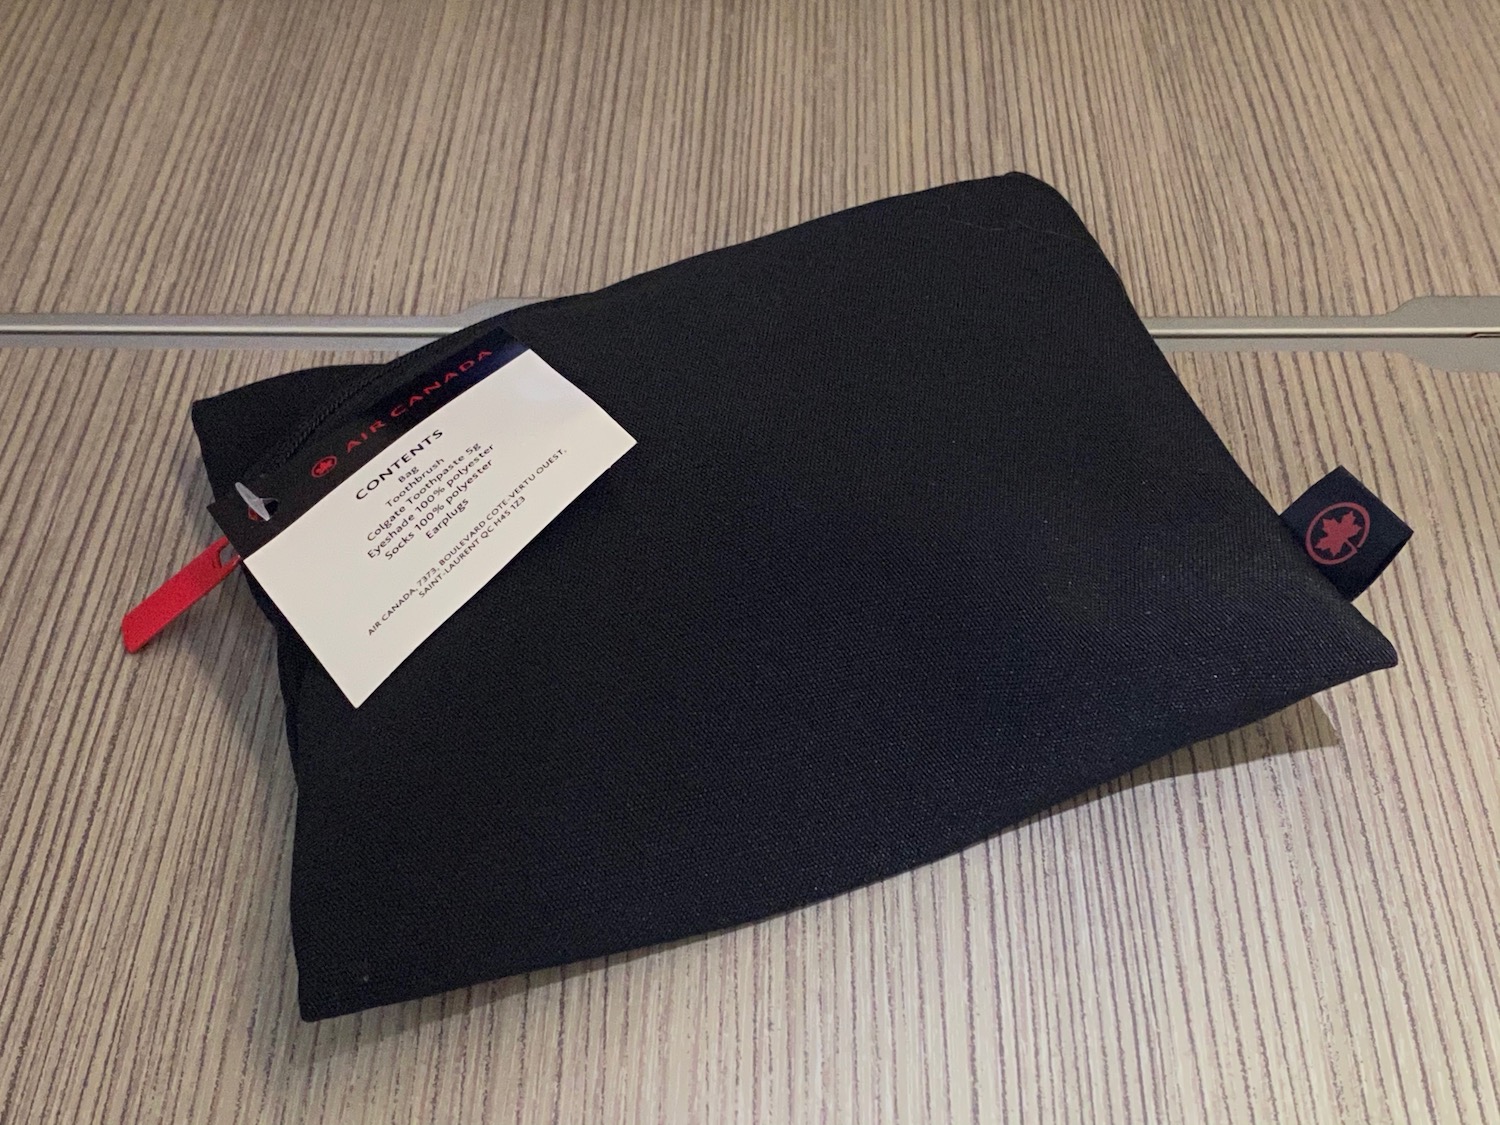 a black bag with a tag on it